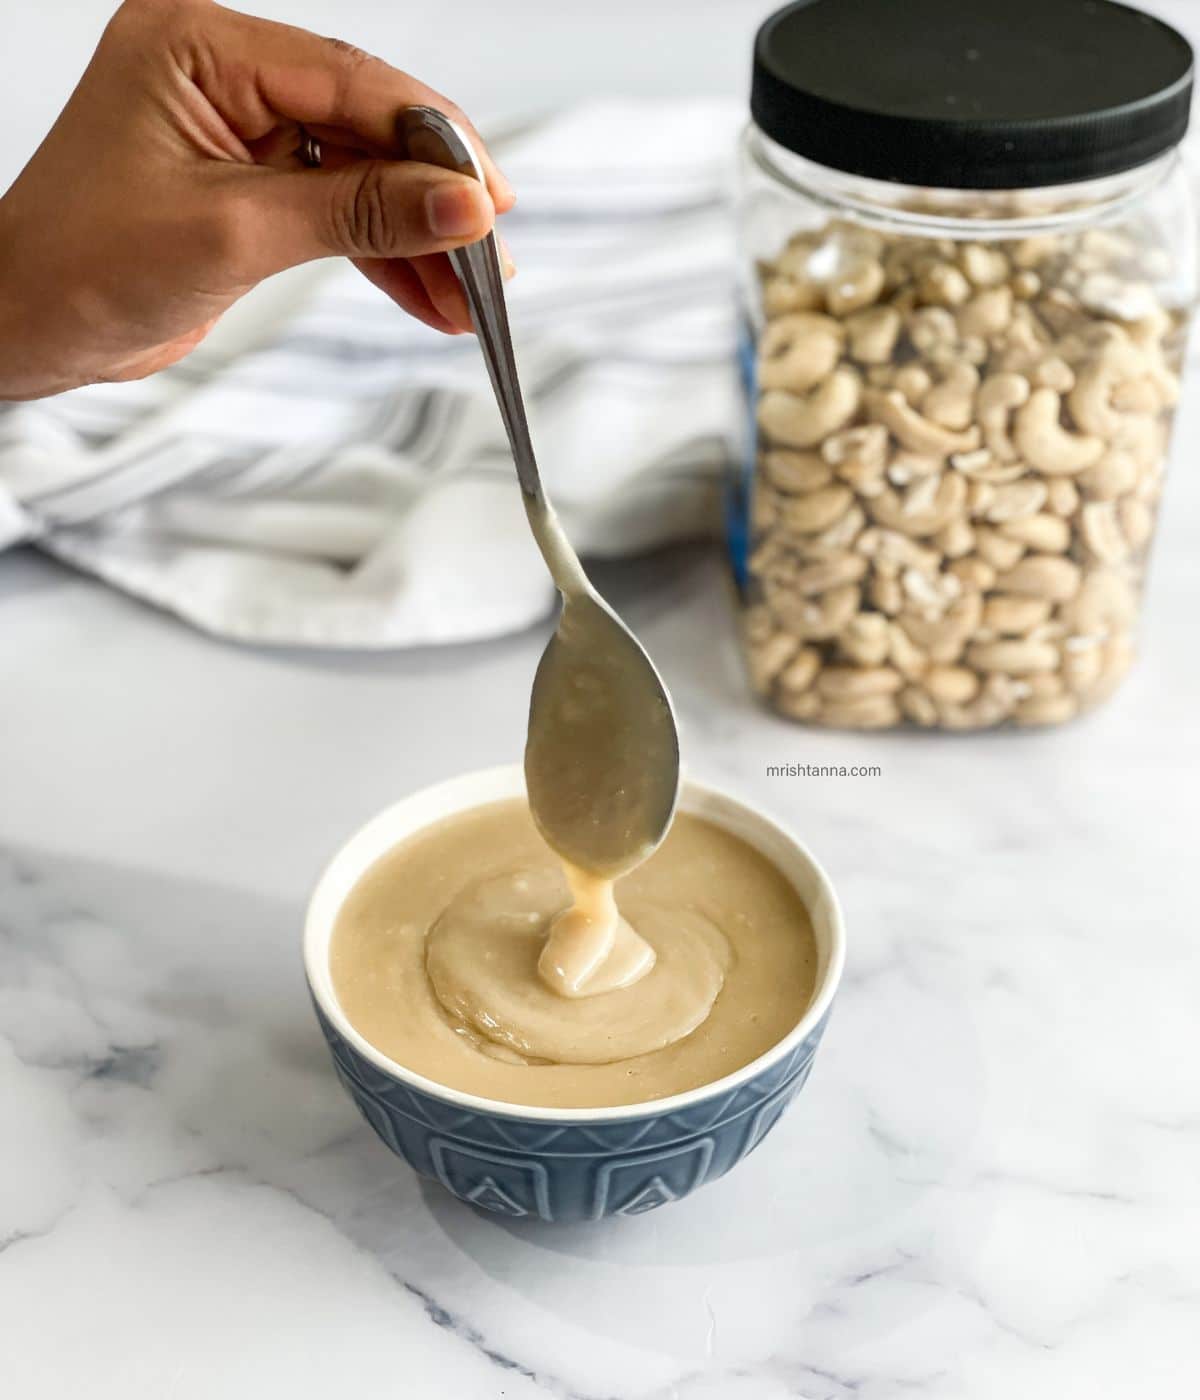 A person is lifting a spoon of vegan condensed milk.